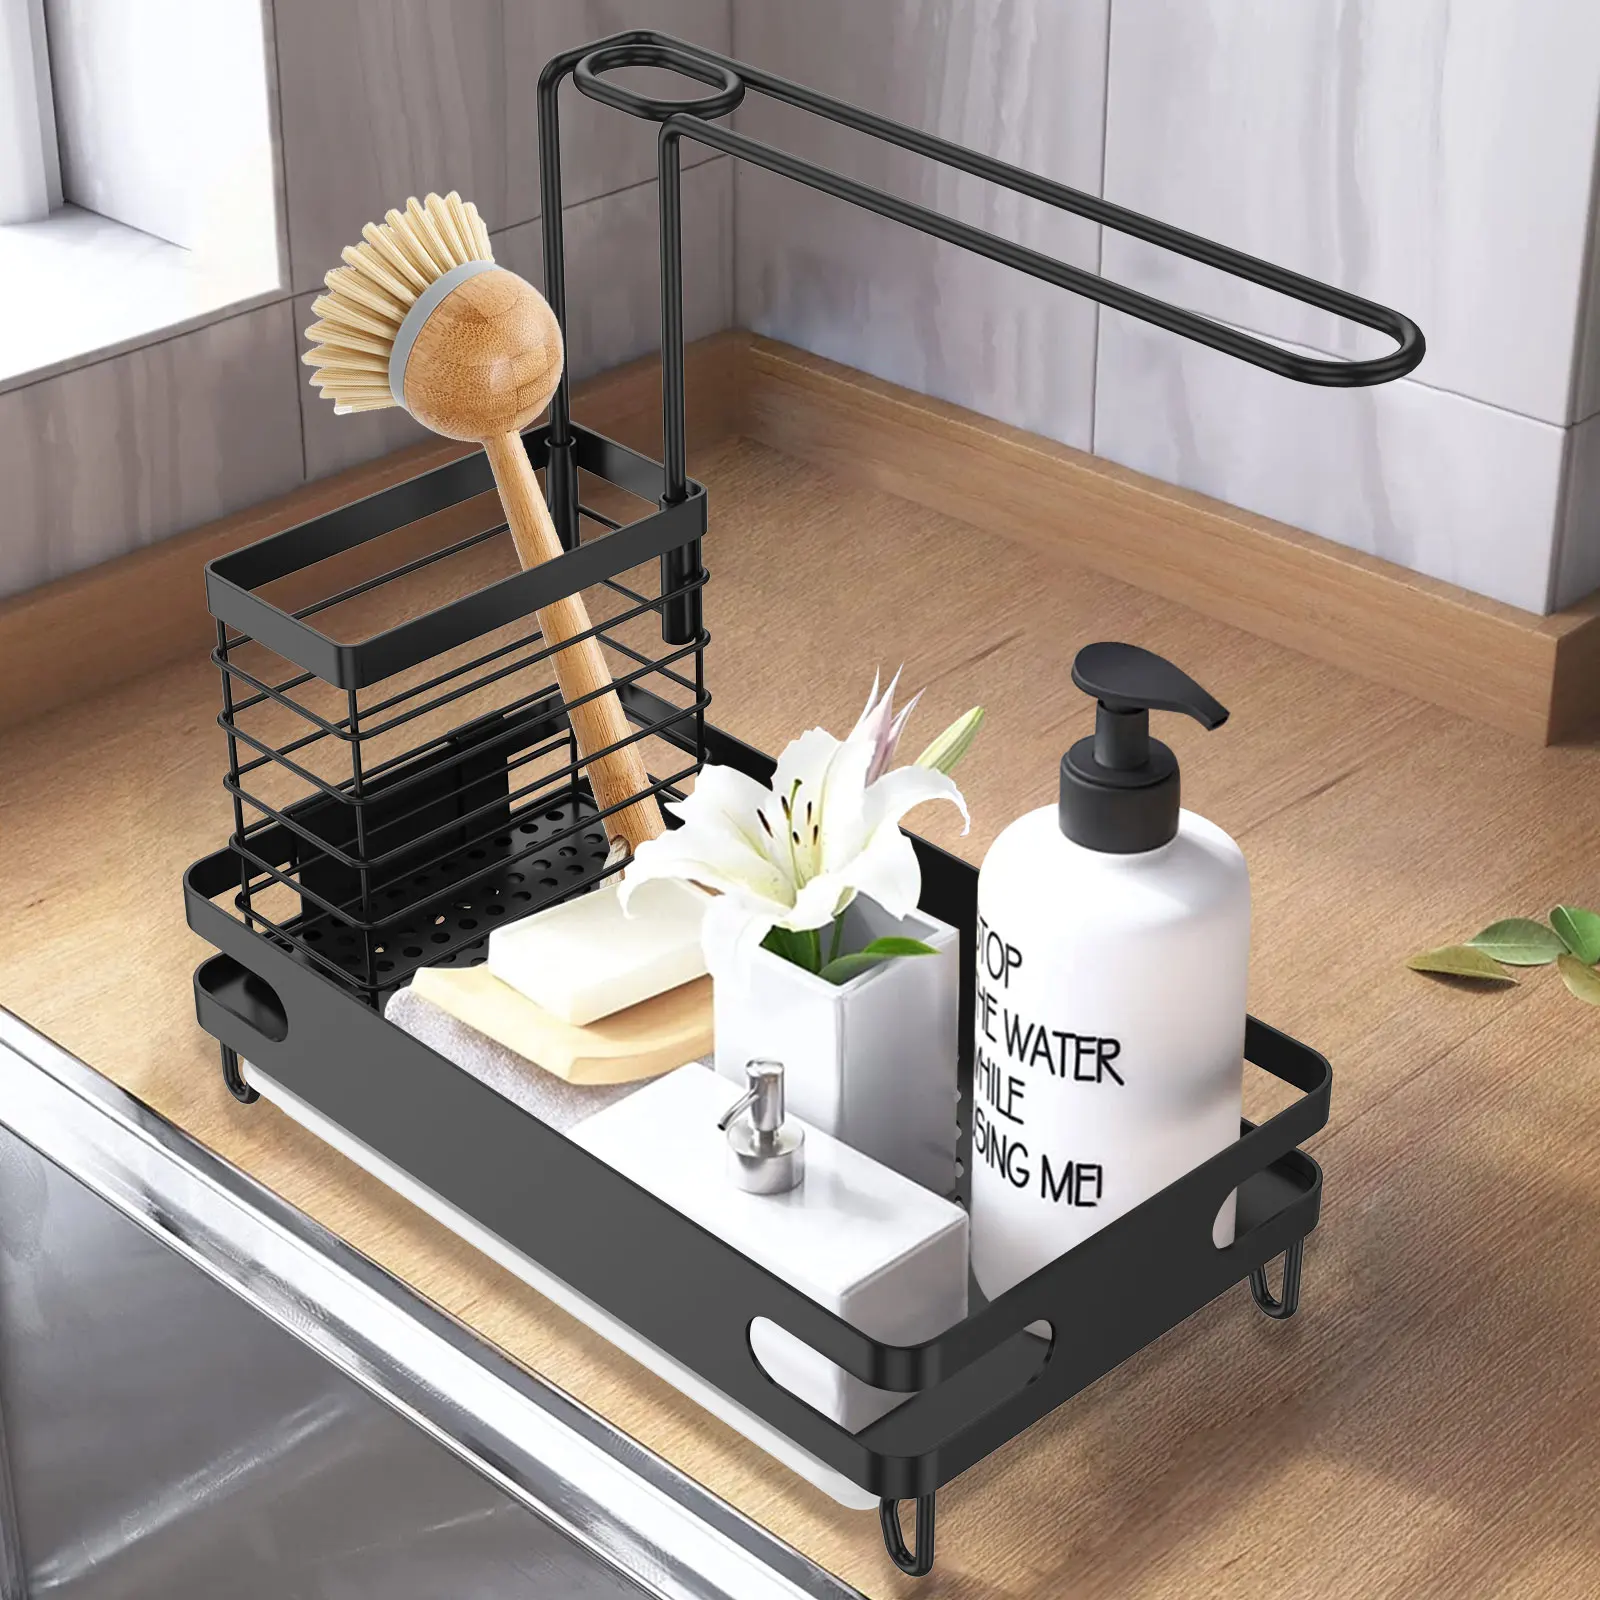 

New Kitchen Sink Caddy Sponge Holder 3 in 1 Sink Organizer with with Towel Rack and Removable Drain Tray Rust Proof Sponge Soap